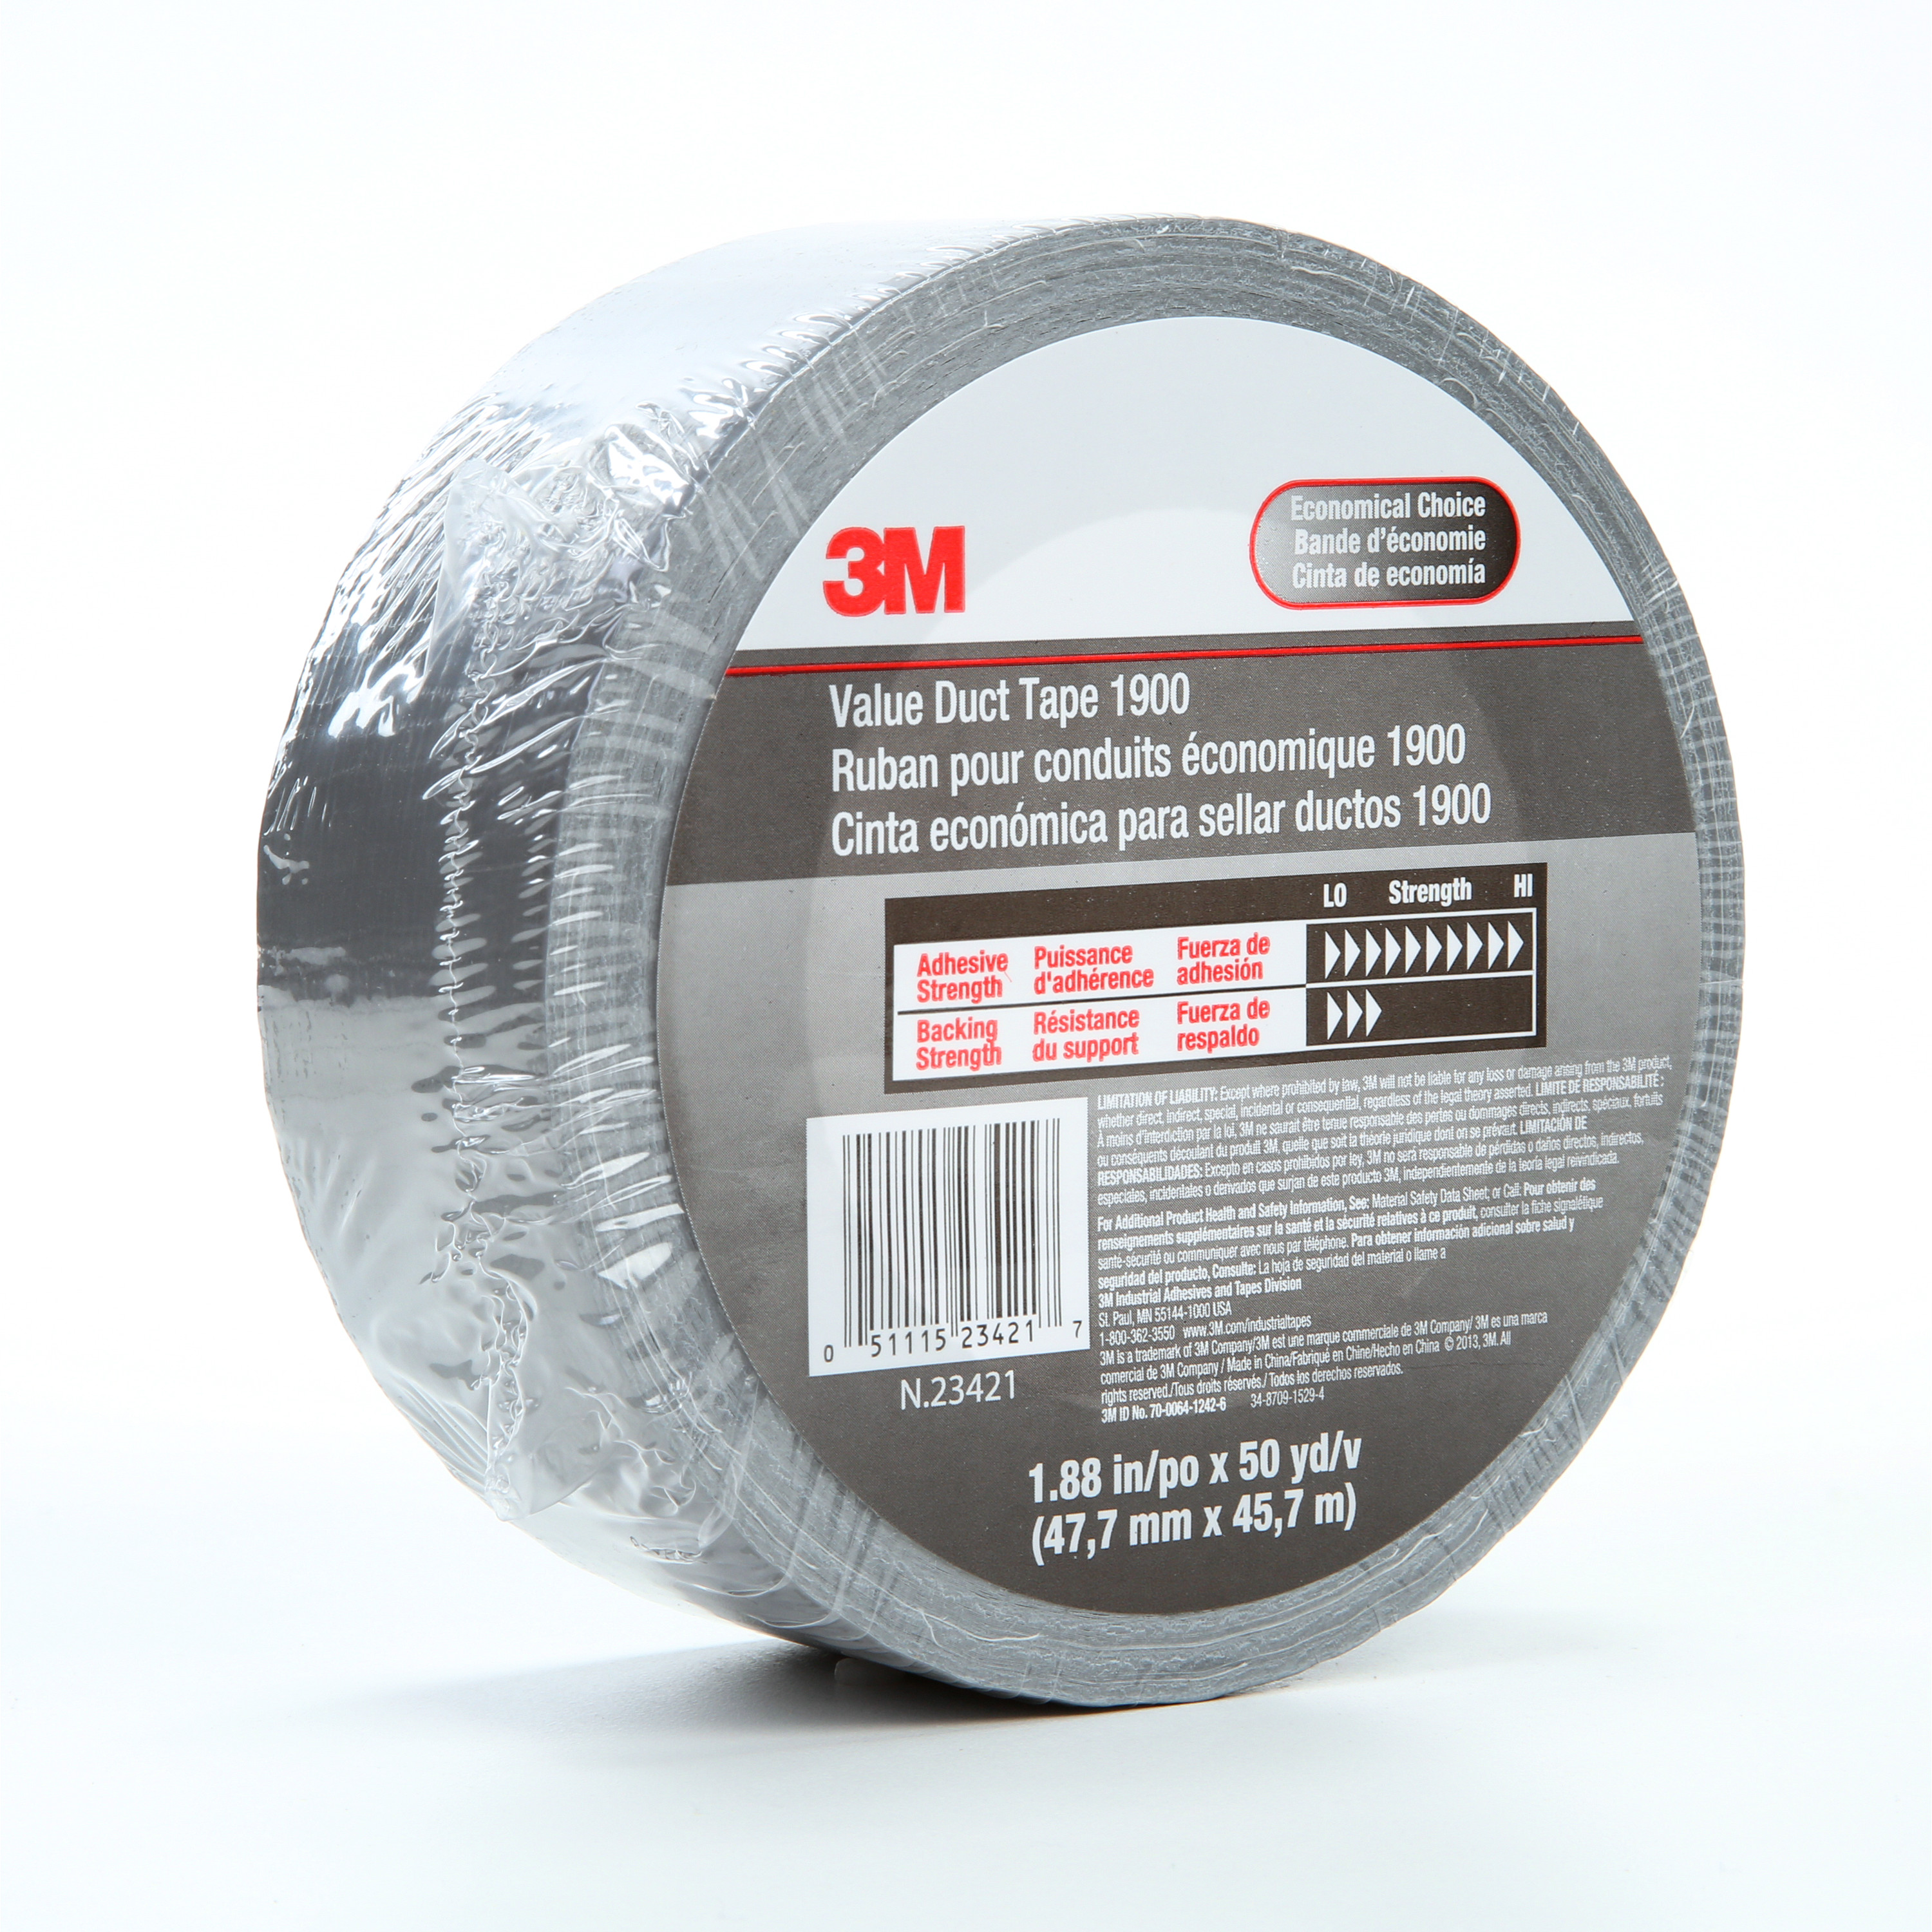 3M™ Value Duct Tape 1900, Silver, 1.88 in x 50 yd, 5.8 mil, 24 per case,
Individually Wrapped Conveniently Packaged